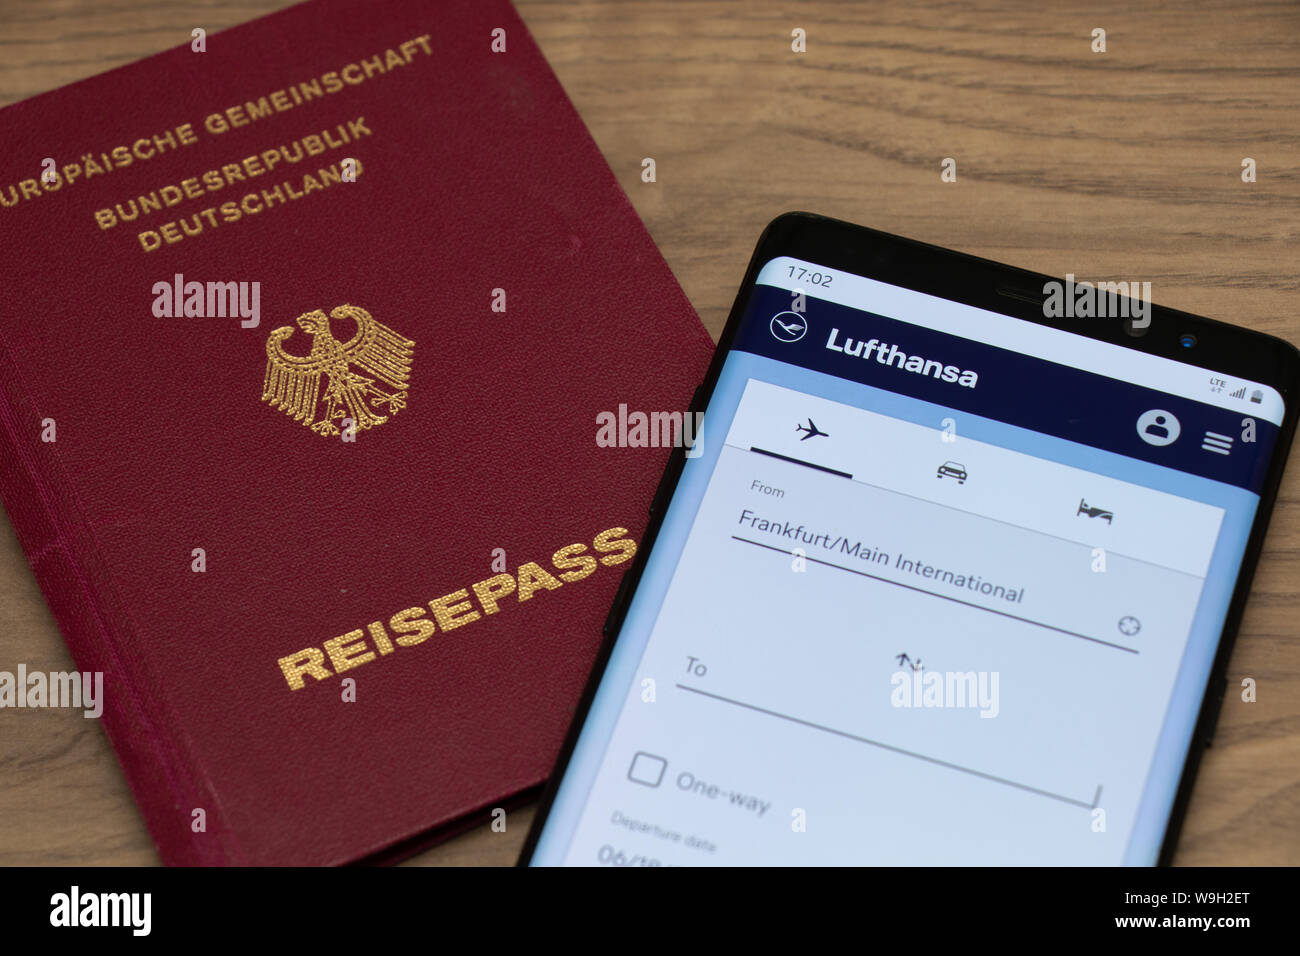 German Passport and Lufthansa website on a smartphone seen while placed on a wooden table. Stock Photo